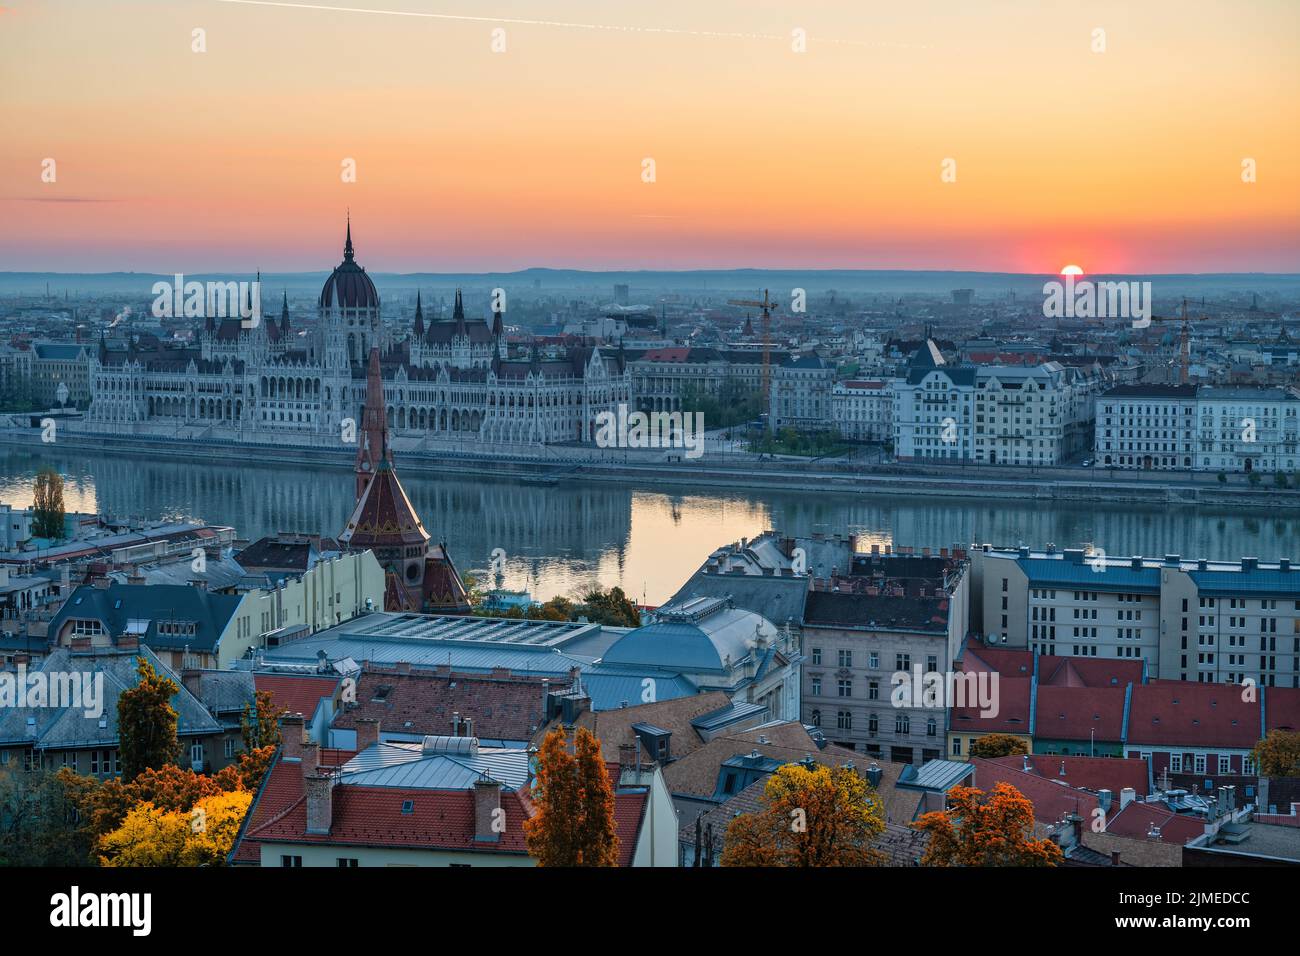 Budapest Hungary, sunrise city skyline at Hungarian Parliament and Danube River with autumn foliage Stock Photo